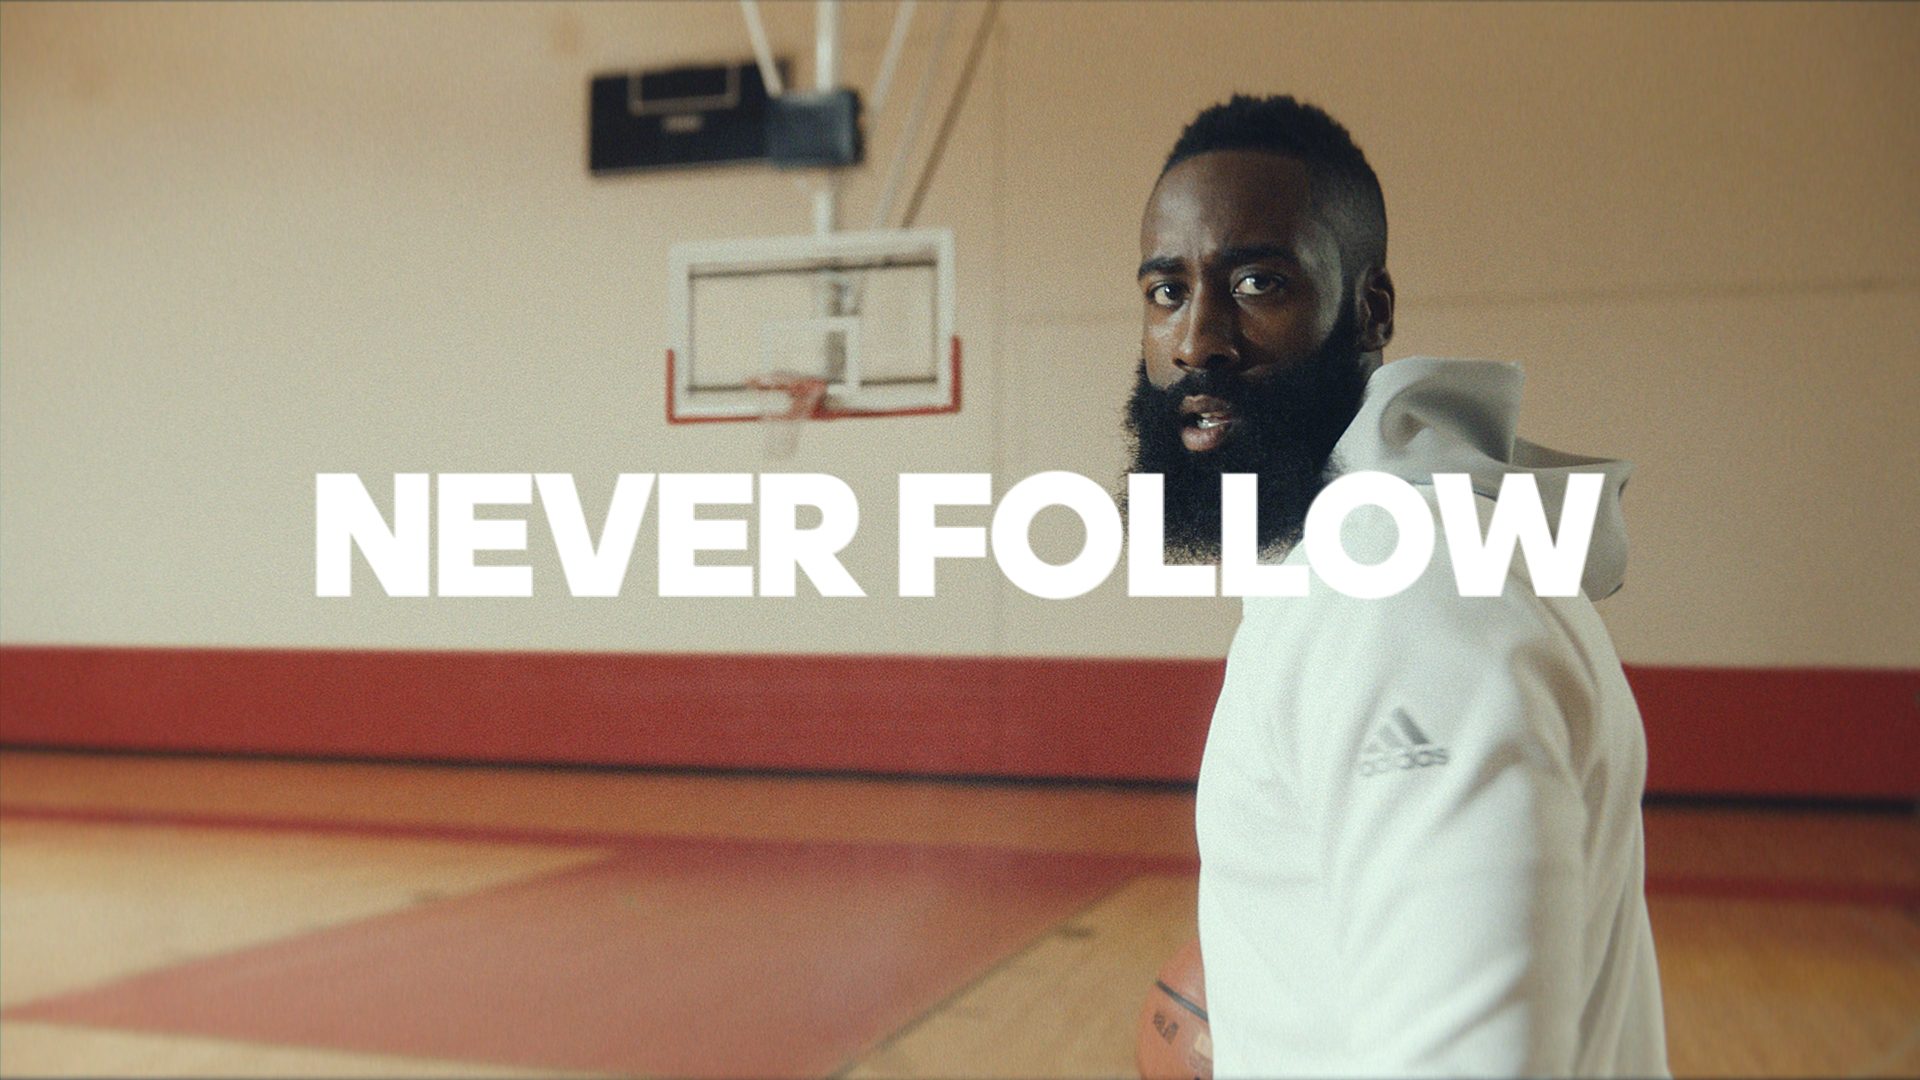 James stands alone 'Creators Never Follow' adidas video - and Hollywood